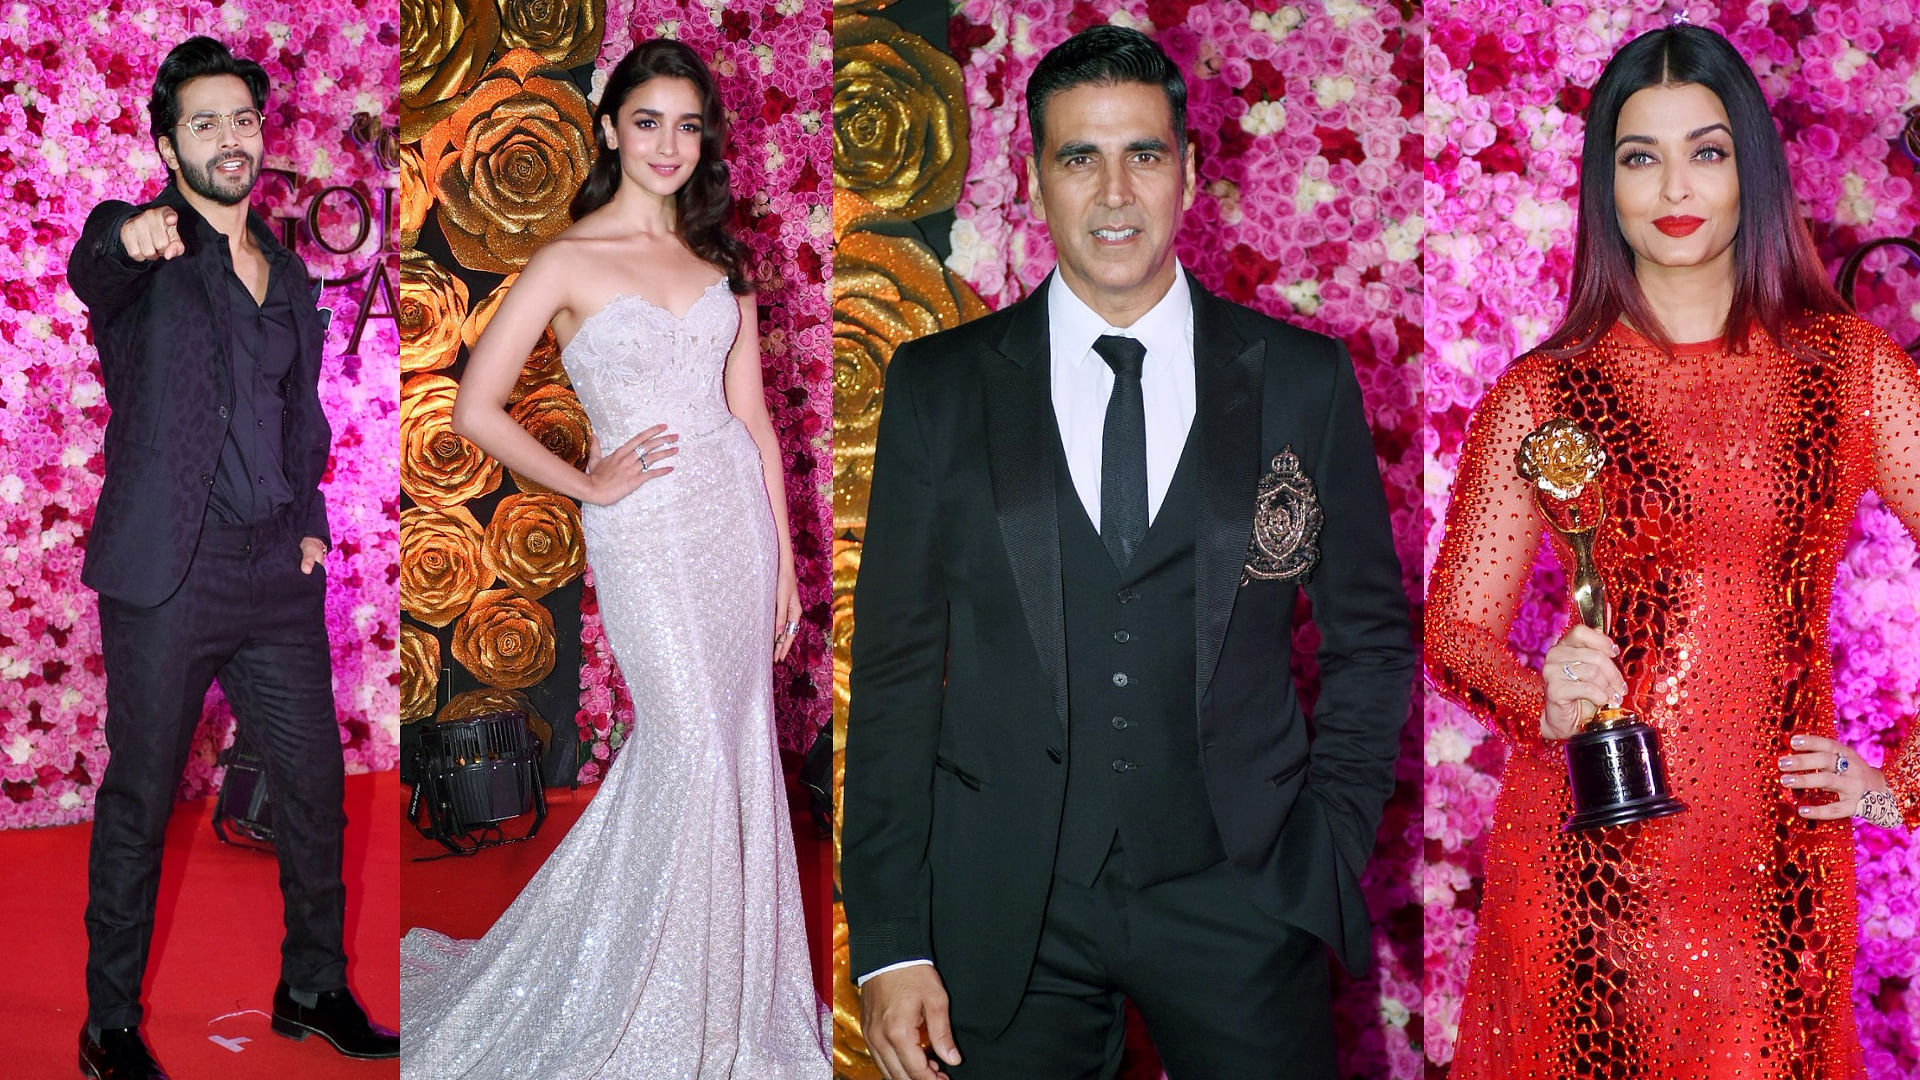 A number of Bollywood A-listers were spotted at this awards show.